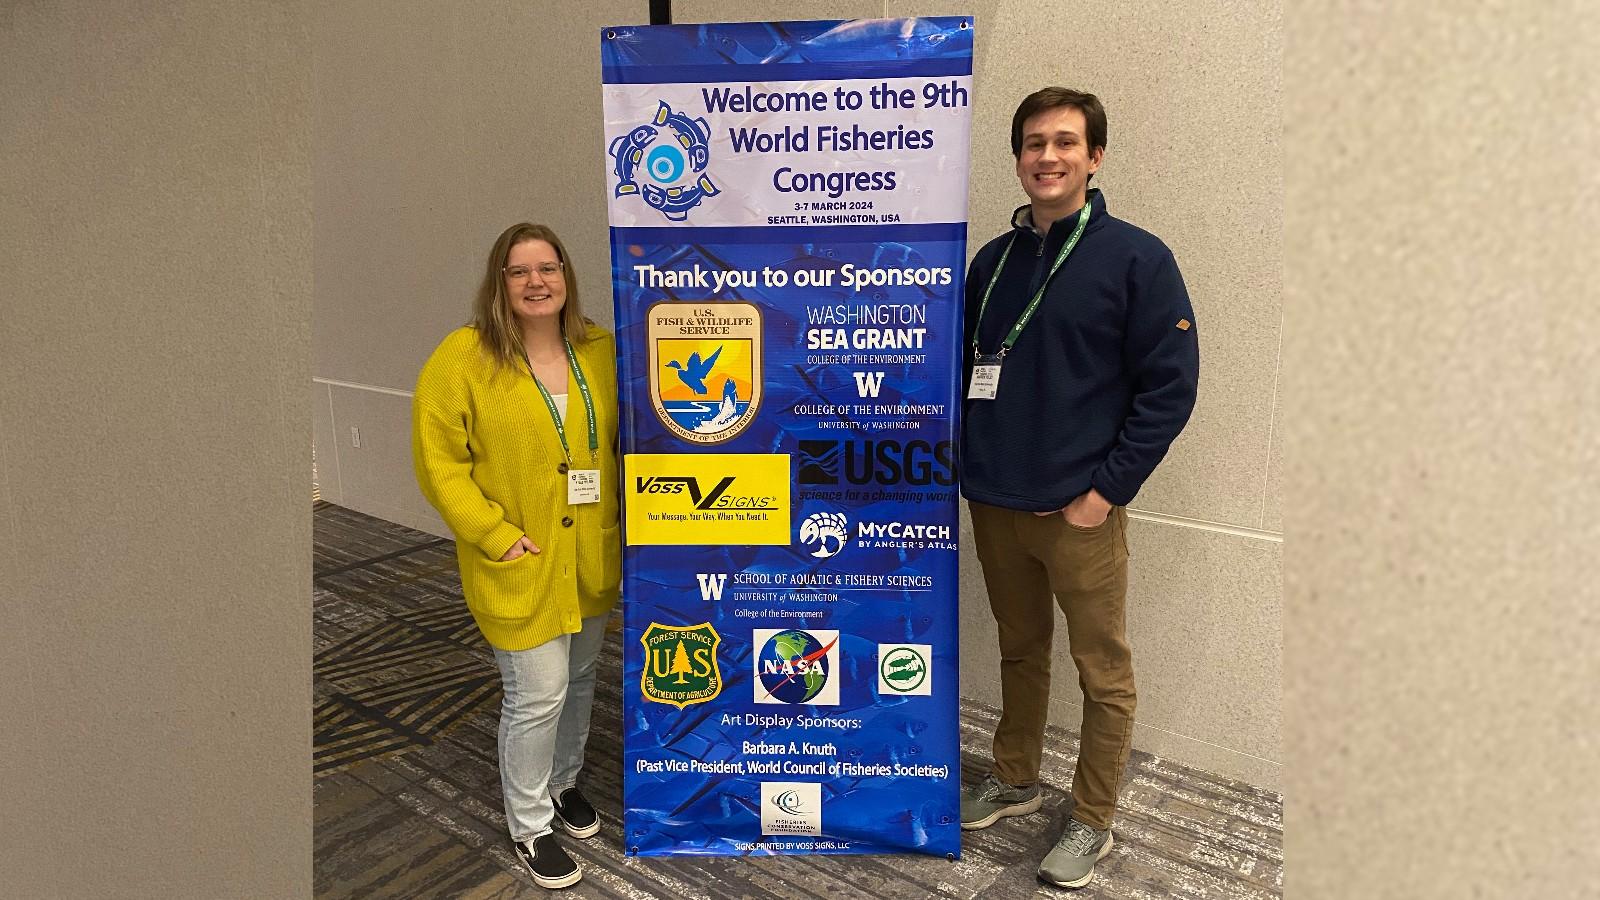 Kylee Wilson and Andrew Foley on either side of a sign for the World Fisheries Congress